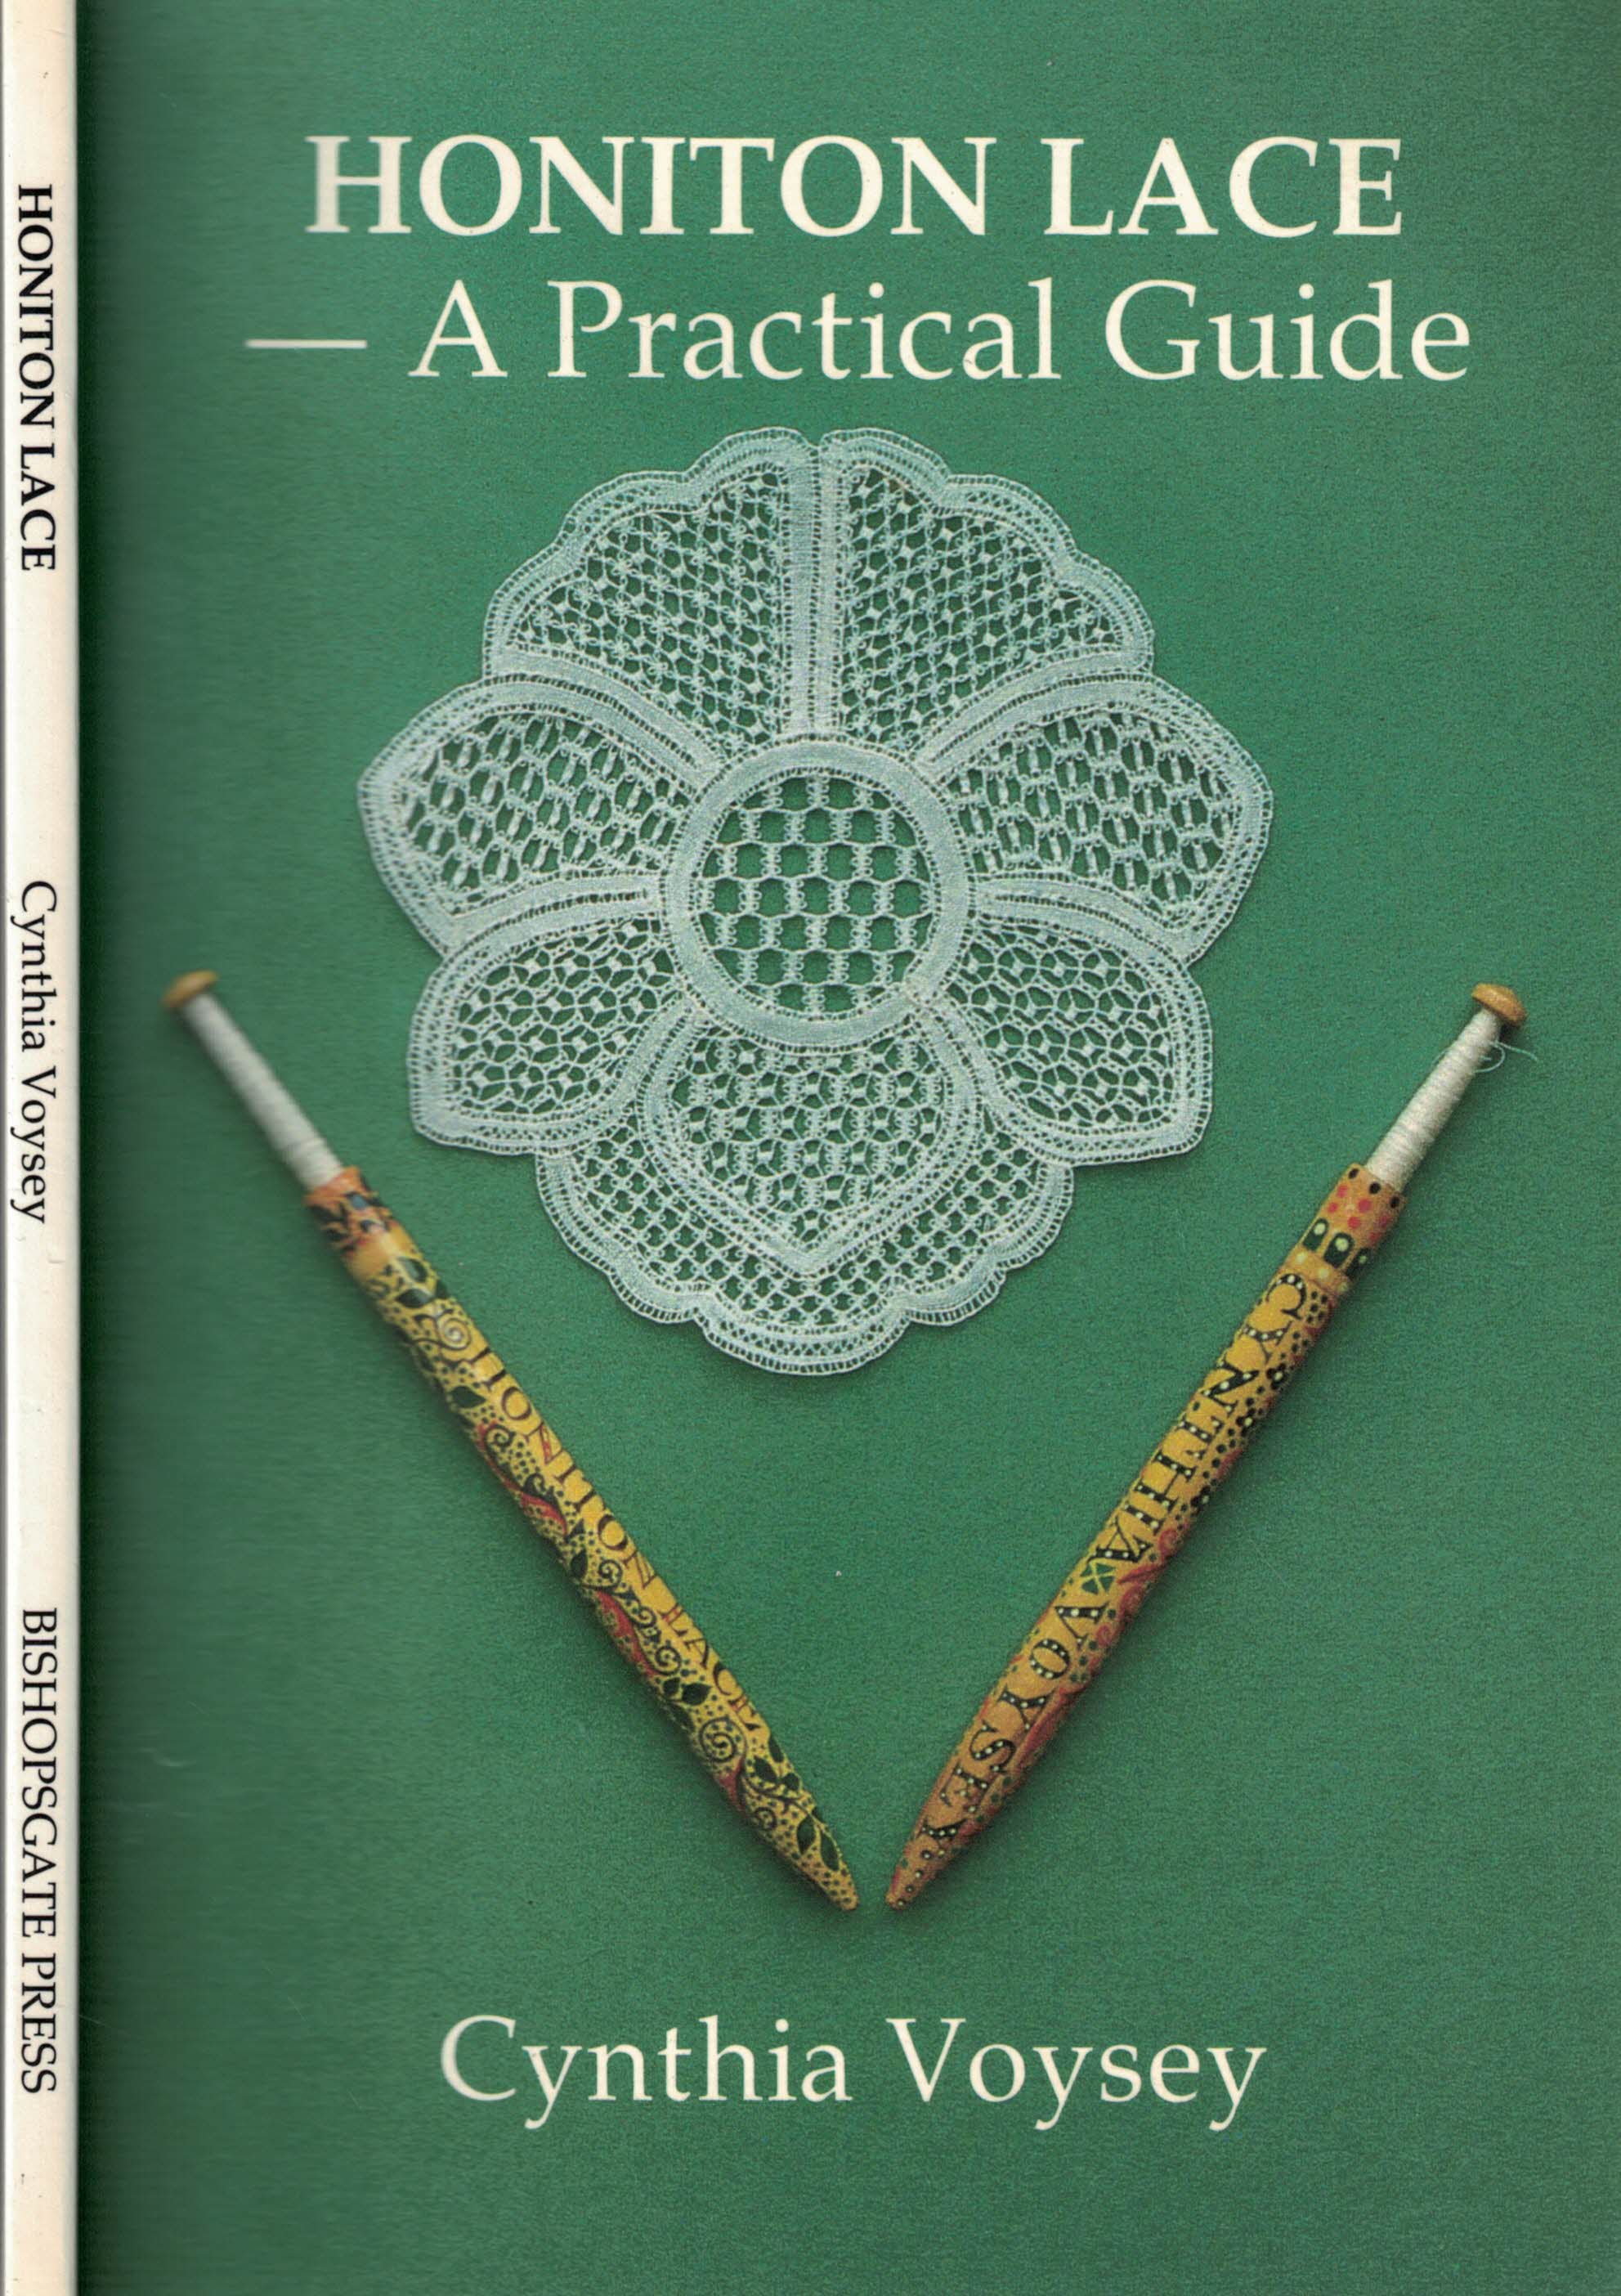 VOYSEY, CYNTHIA - Honiton Lace - a Practical Guide